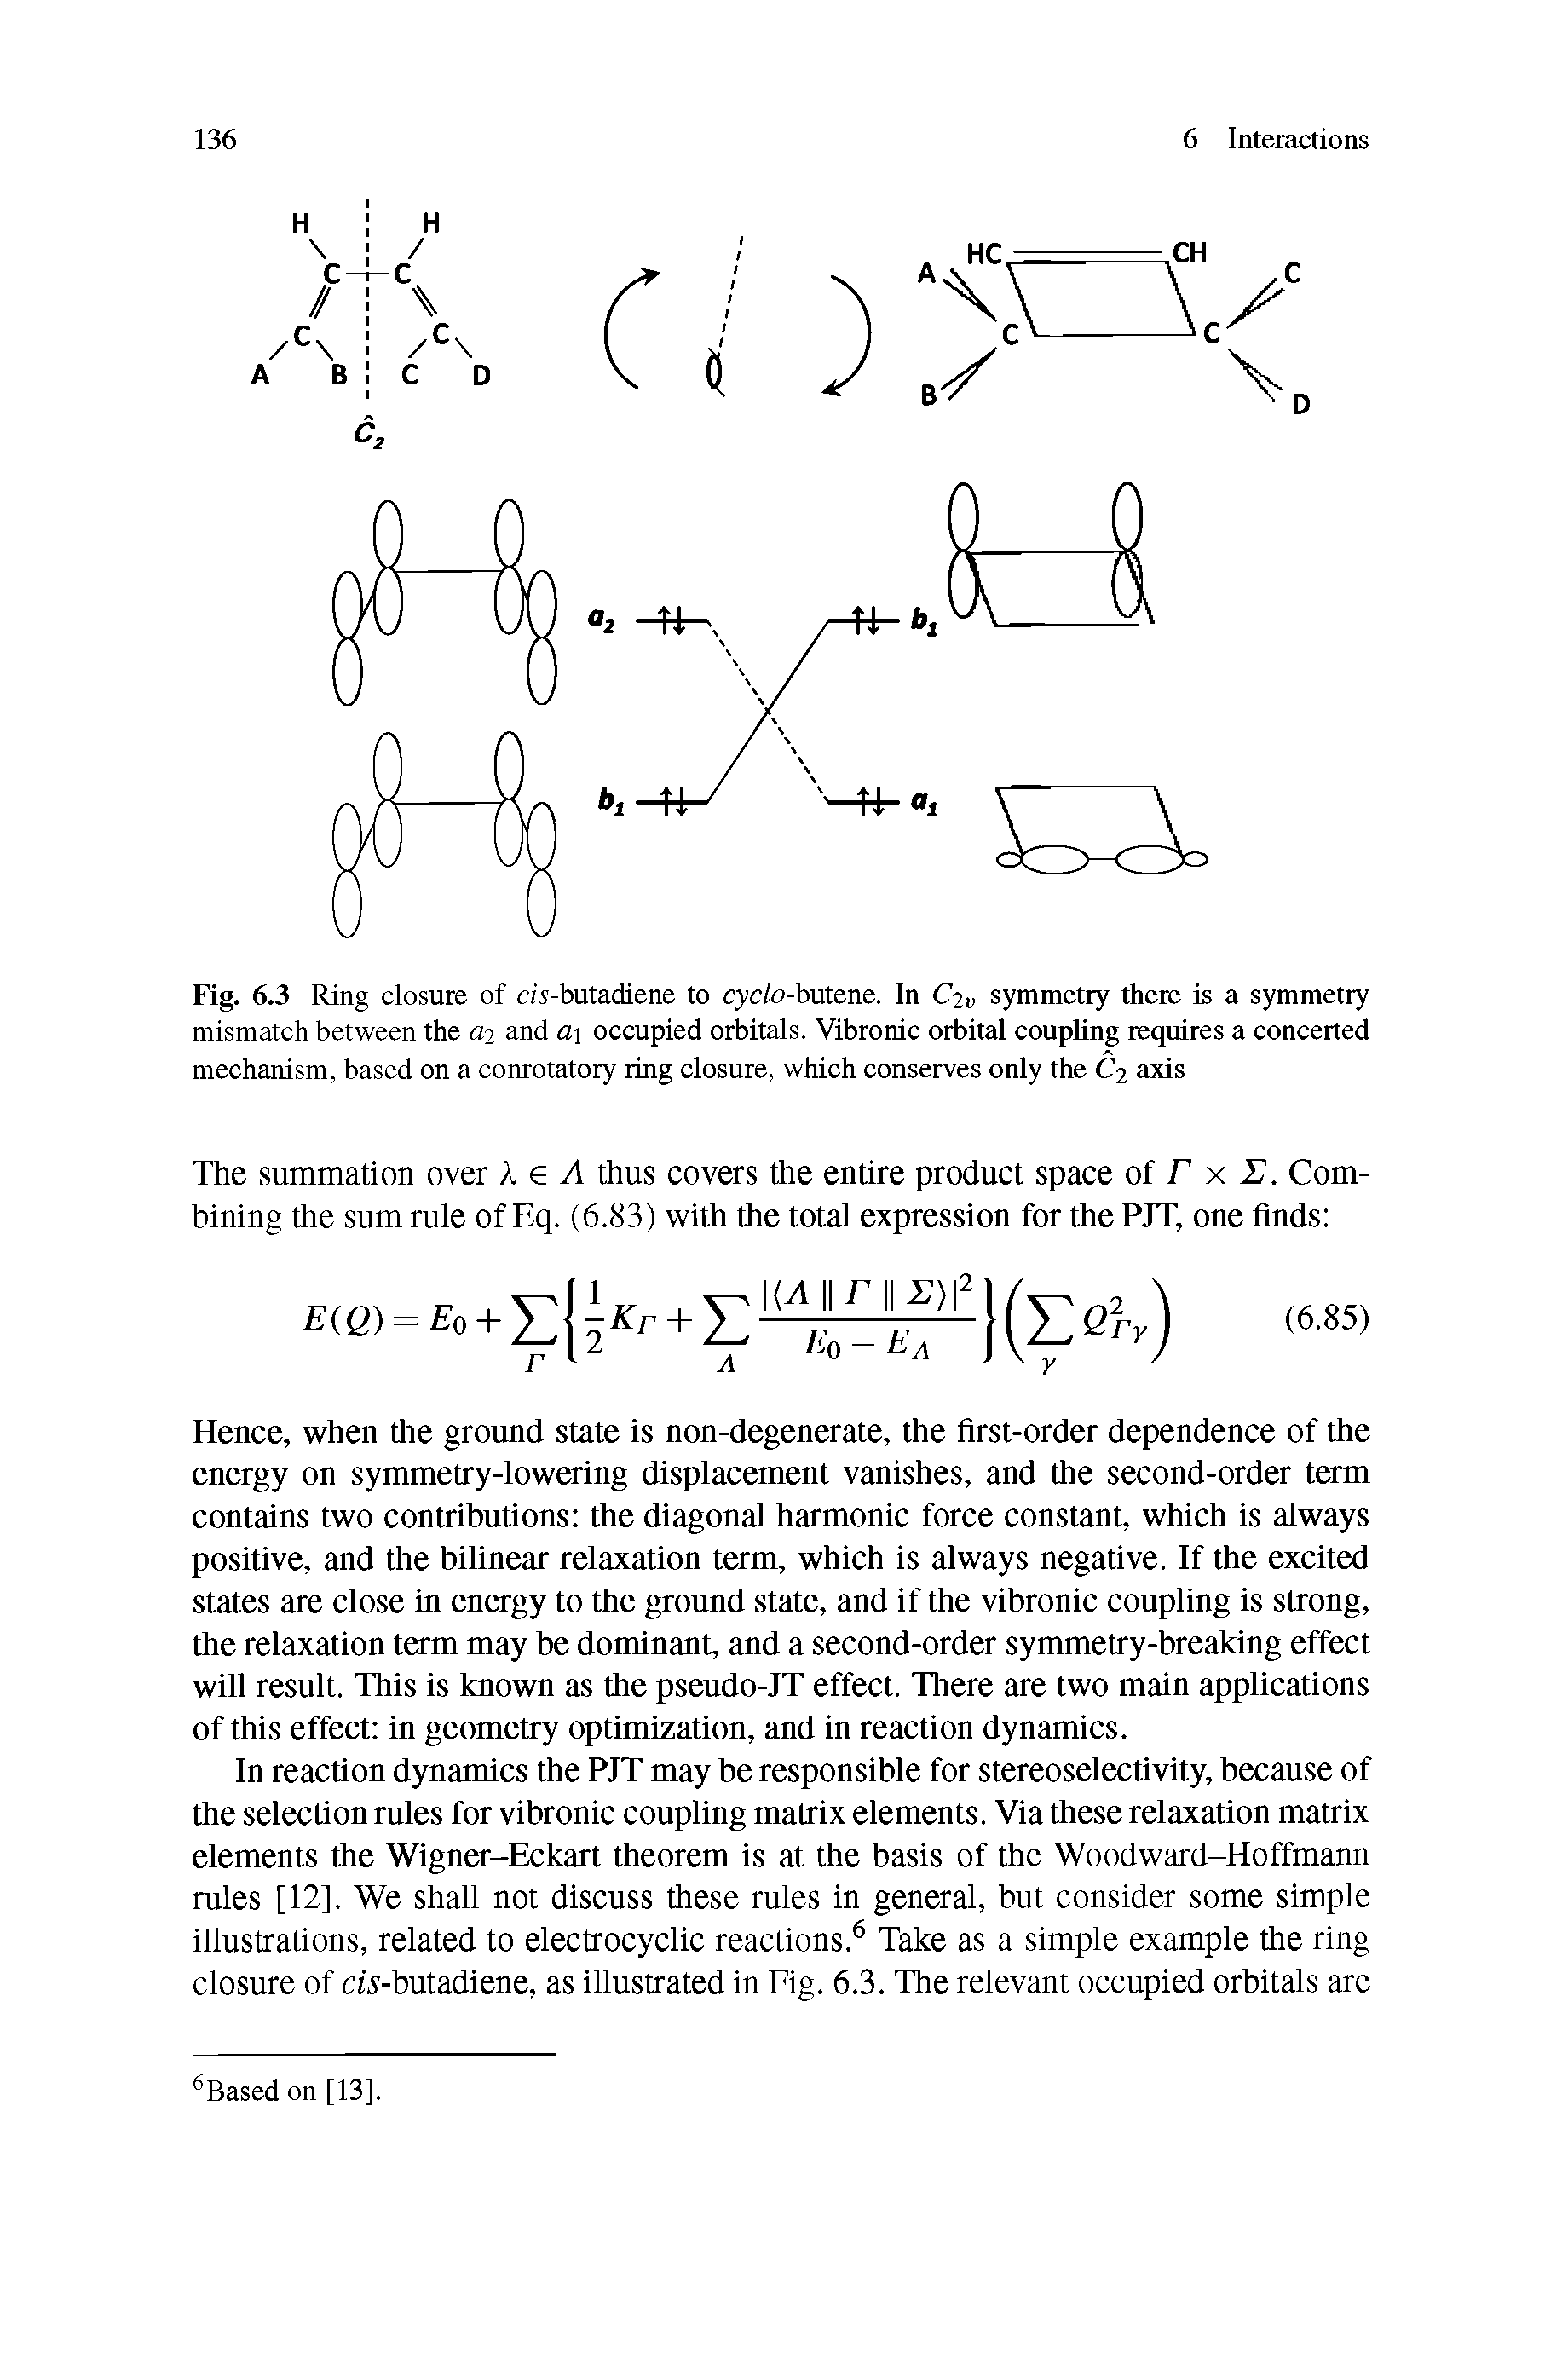 Fig. 6.3 Ring closure of di-butadiene to cyc/o-butene. In C2v symmetry there is a symmetry mismatch between the 2 and a occupied orbitals. Vibronic orbited coupling requires a concerted mechanism, based on a conrotatory ting closure, which conserves only the C2 axis...